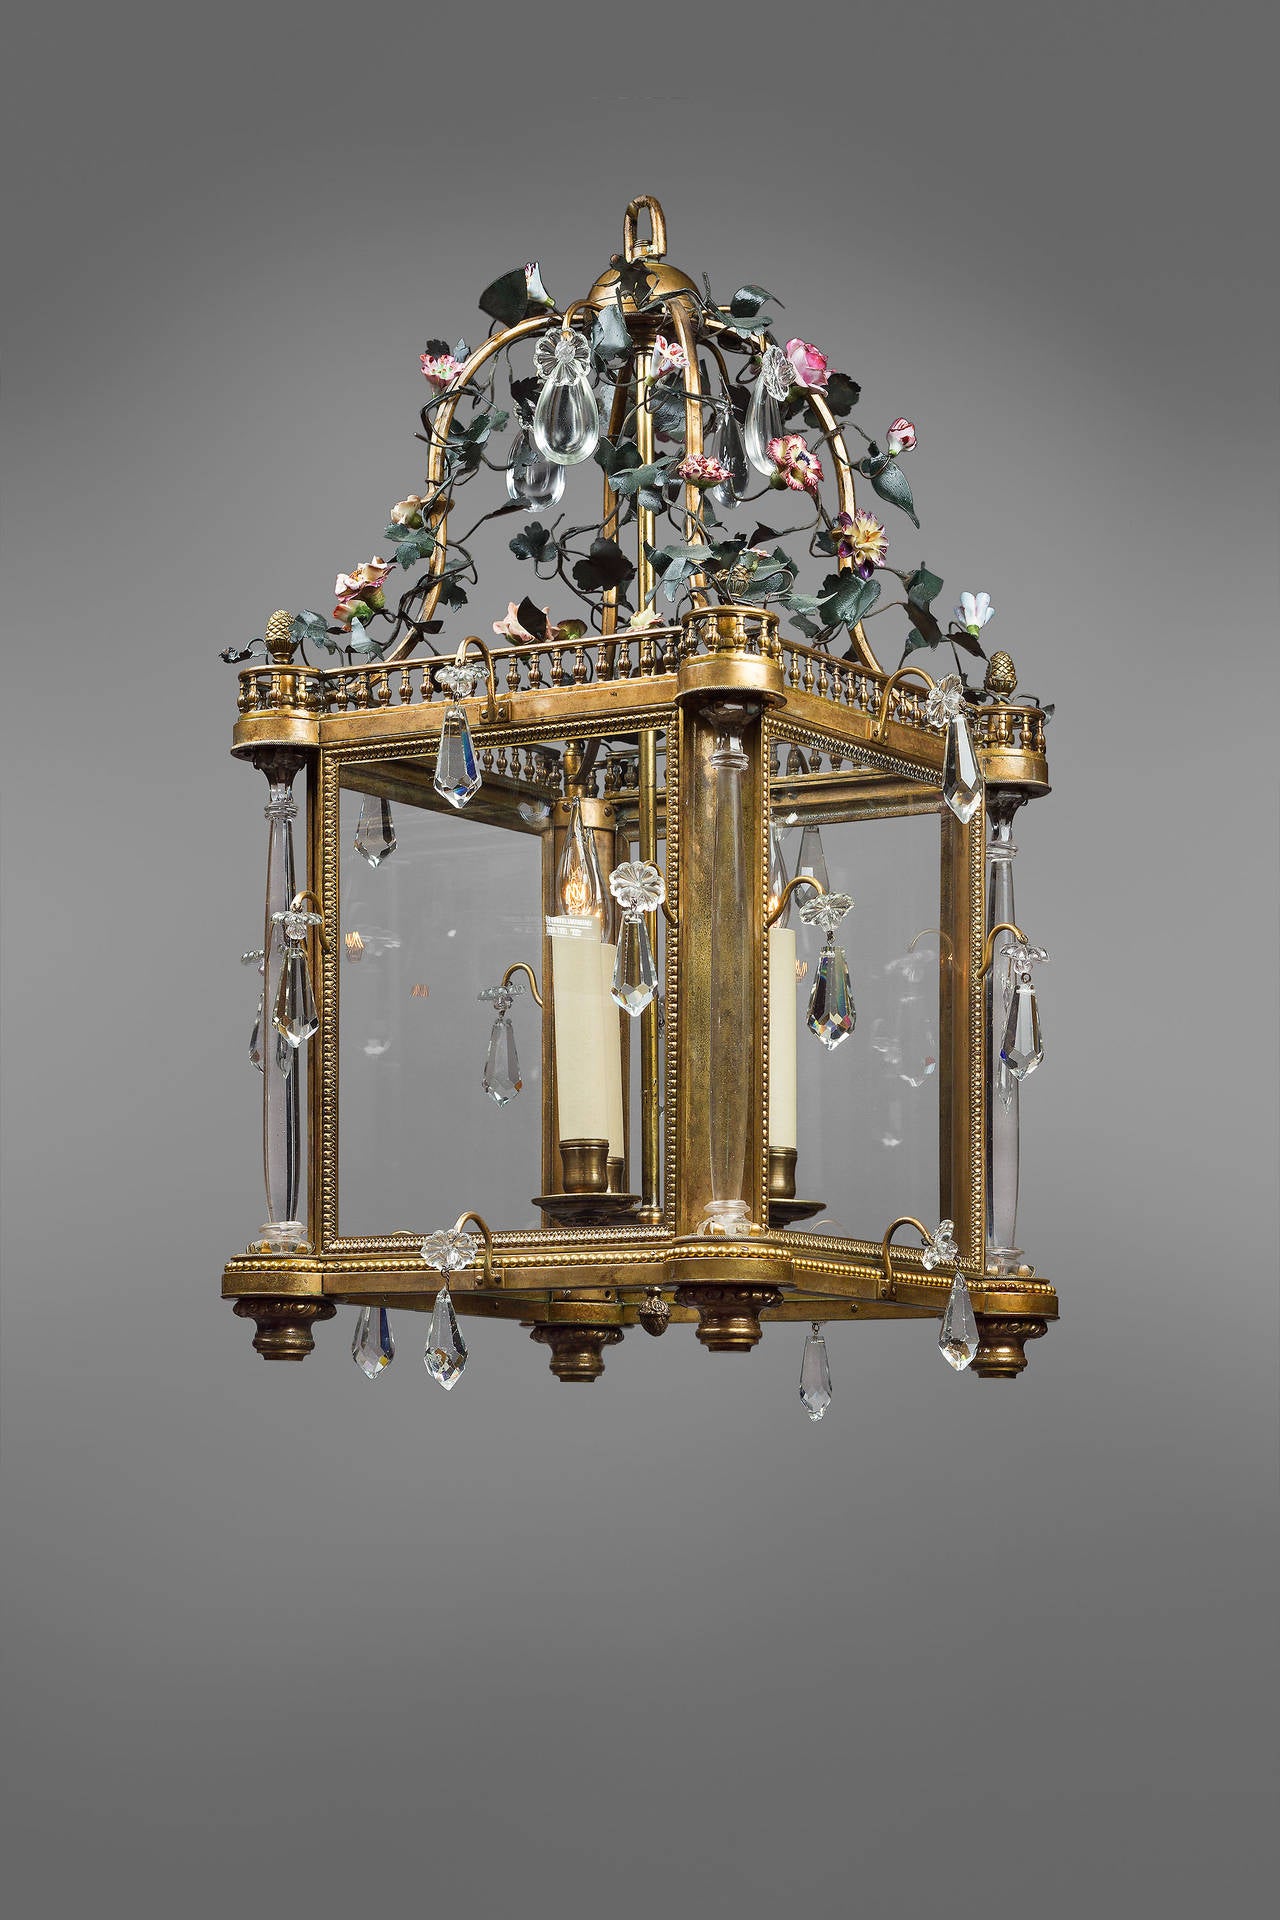 Exceptional bronze lantern with crystals,
France, mid-19th century.
Painted iron and porcelain floral ornaments.
Four glass columns on the edges.
Three lights in the center.